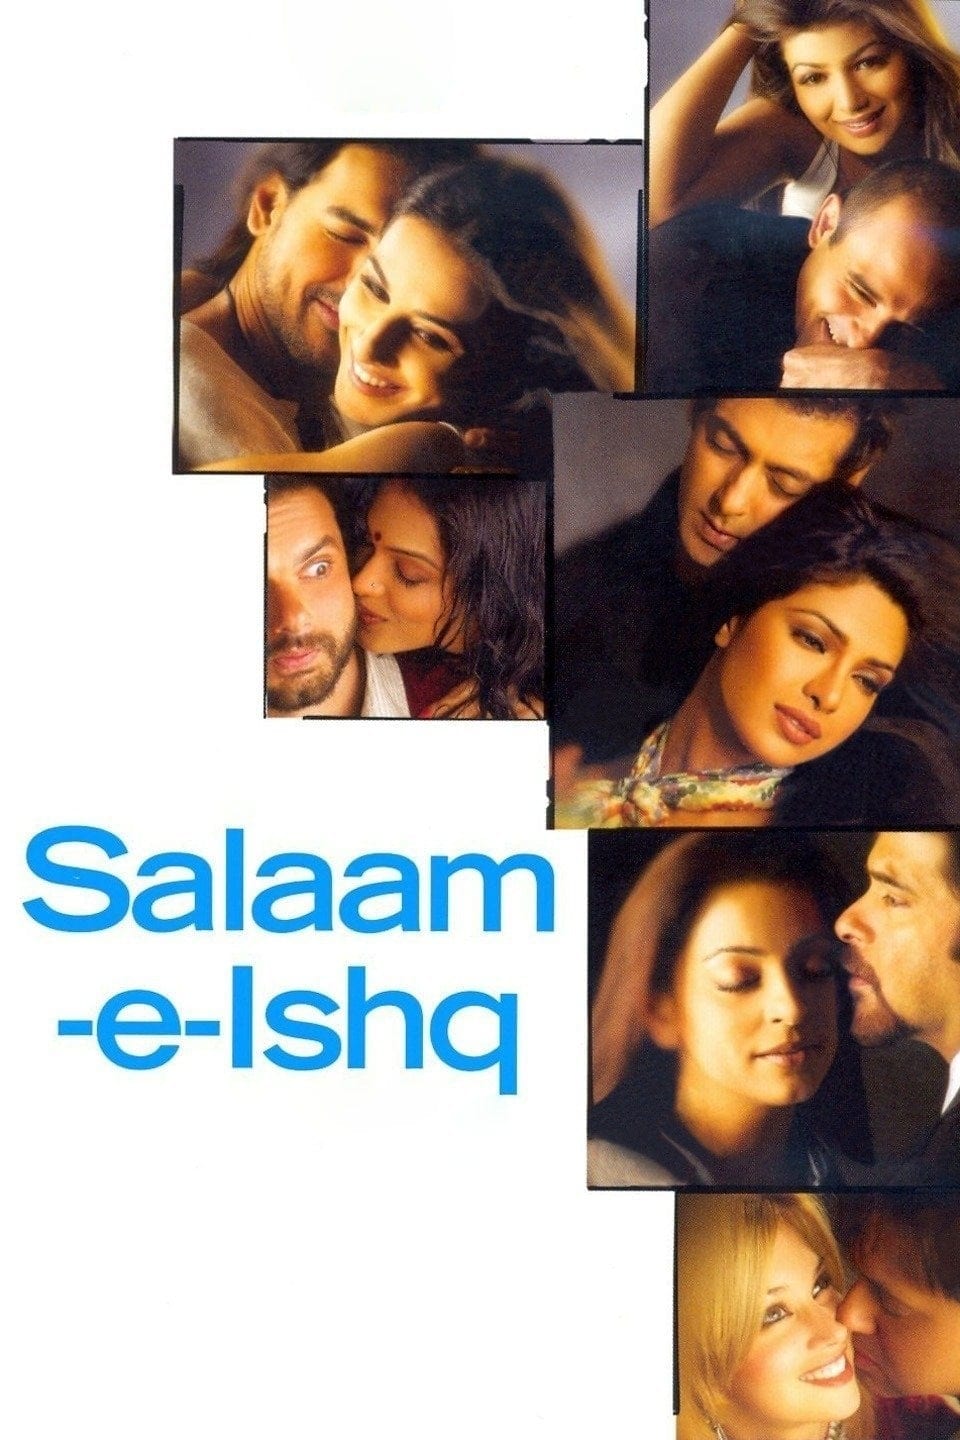 Poster for the movie "Salaam-e-Ishq"